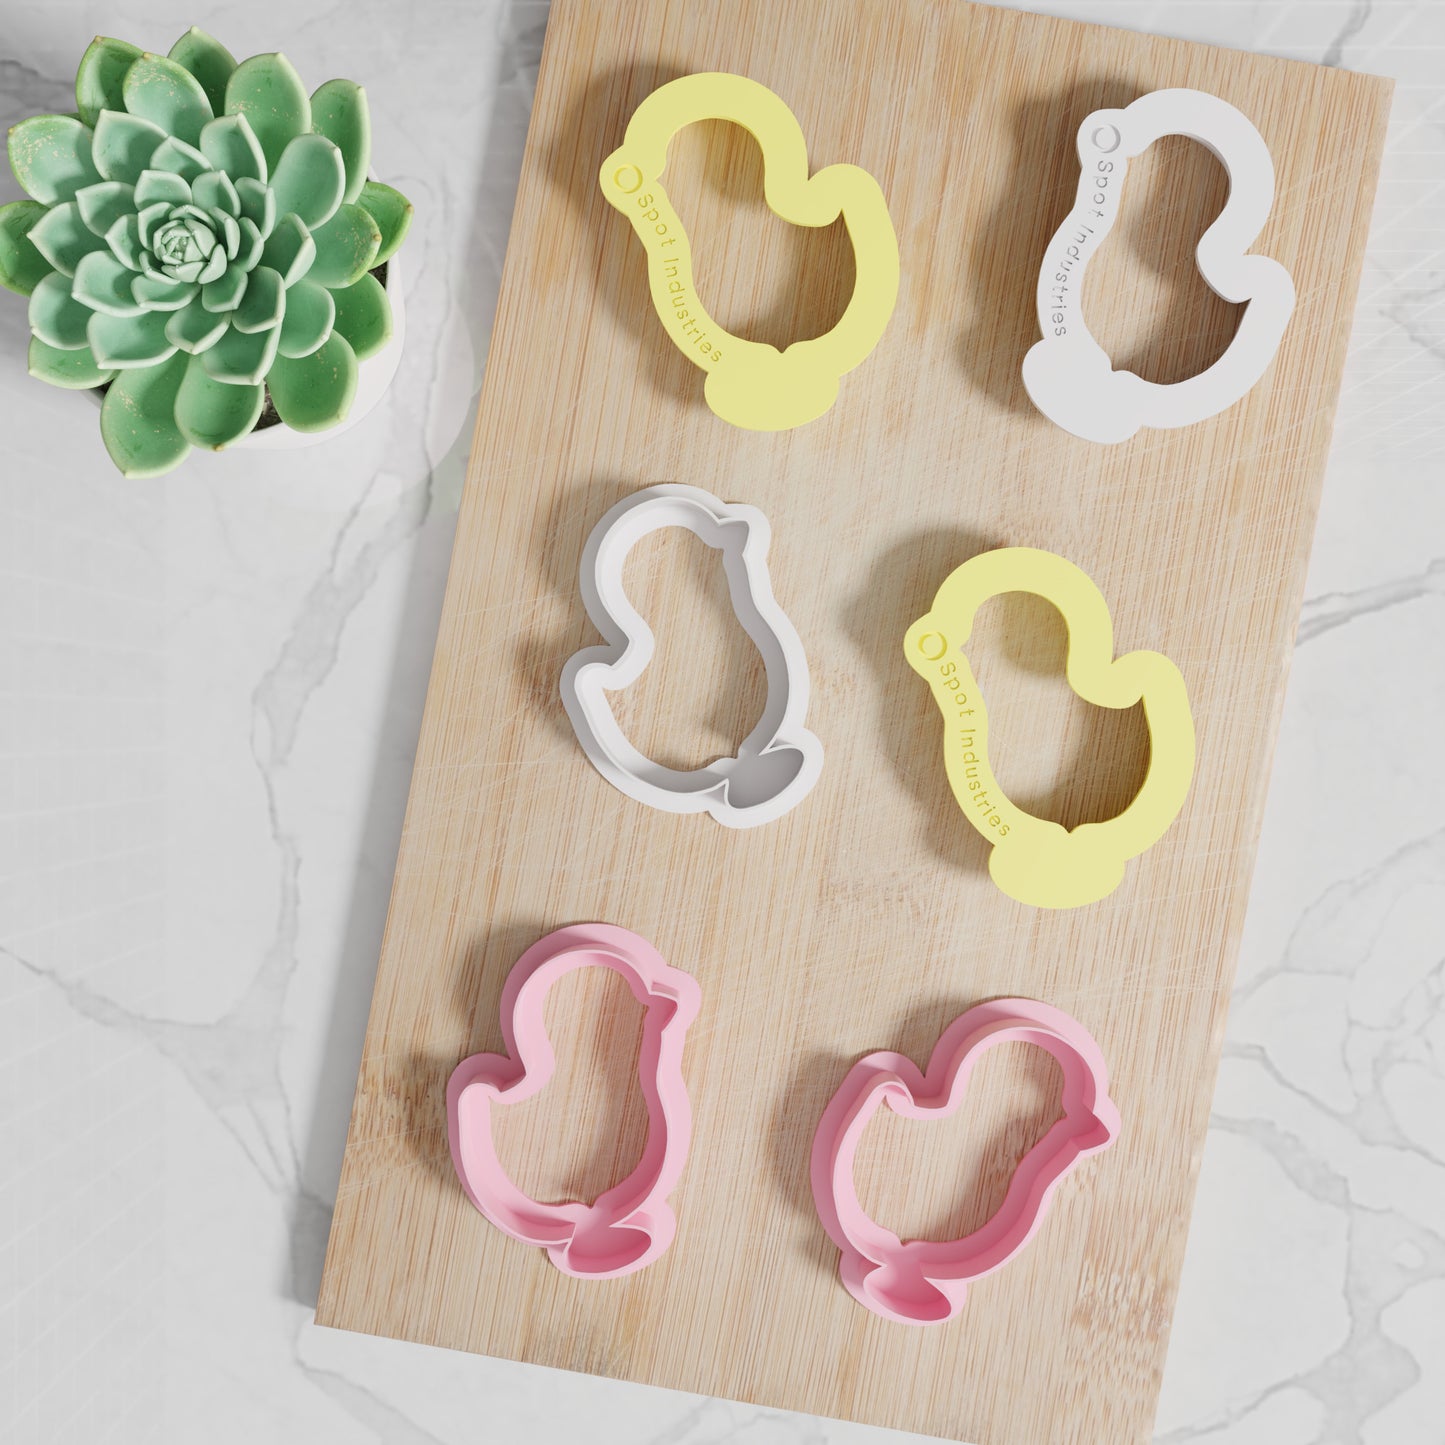 Easter Chick Cookie Cutter Set. Matches Others In Our Easter Collection. Super Cute Easter Chick Cookie Cutter